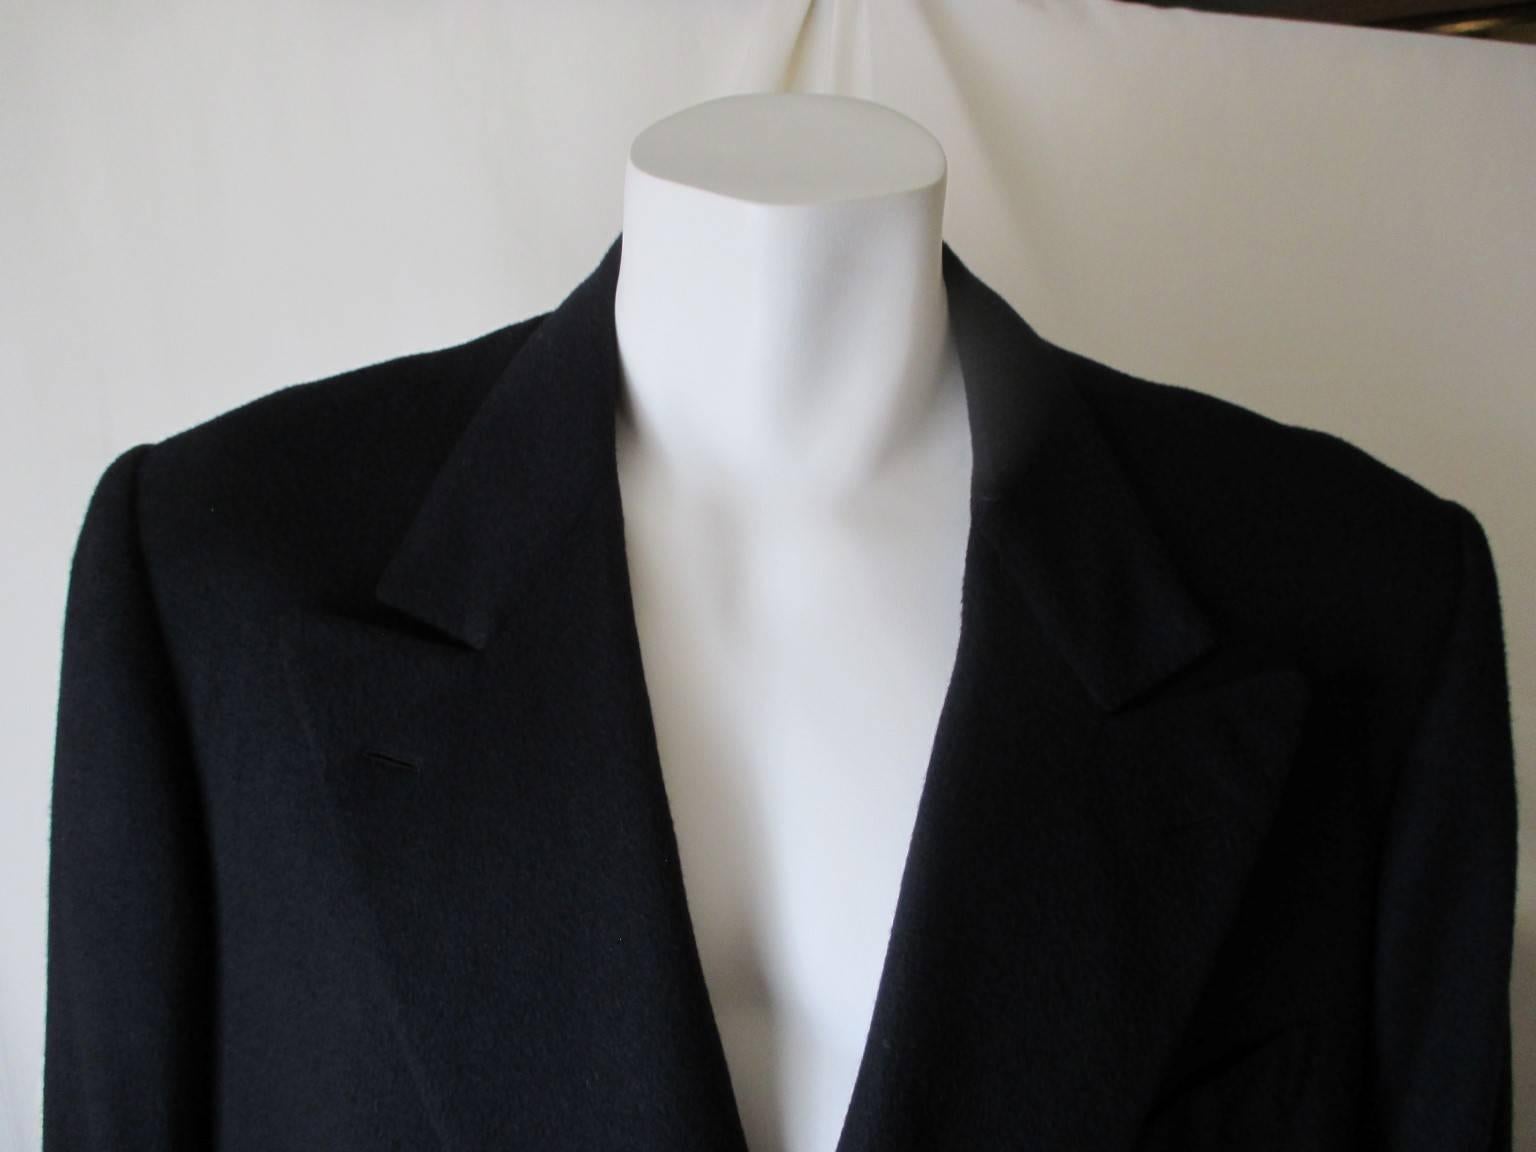 BRIONI roman style, pure Cashmere , very soft blue overcoat
hand made in Italy
Produced for Beale & Inman, New Bond street London
This doublebrested coat has 2 pockets, 1 inside pockets,  100% cashmere.
Size is marked 46/56, see section